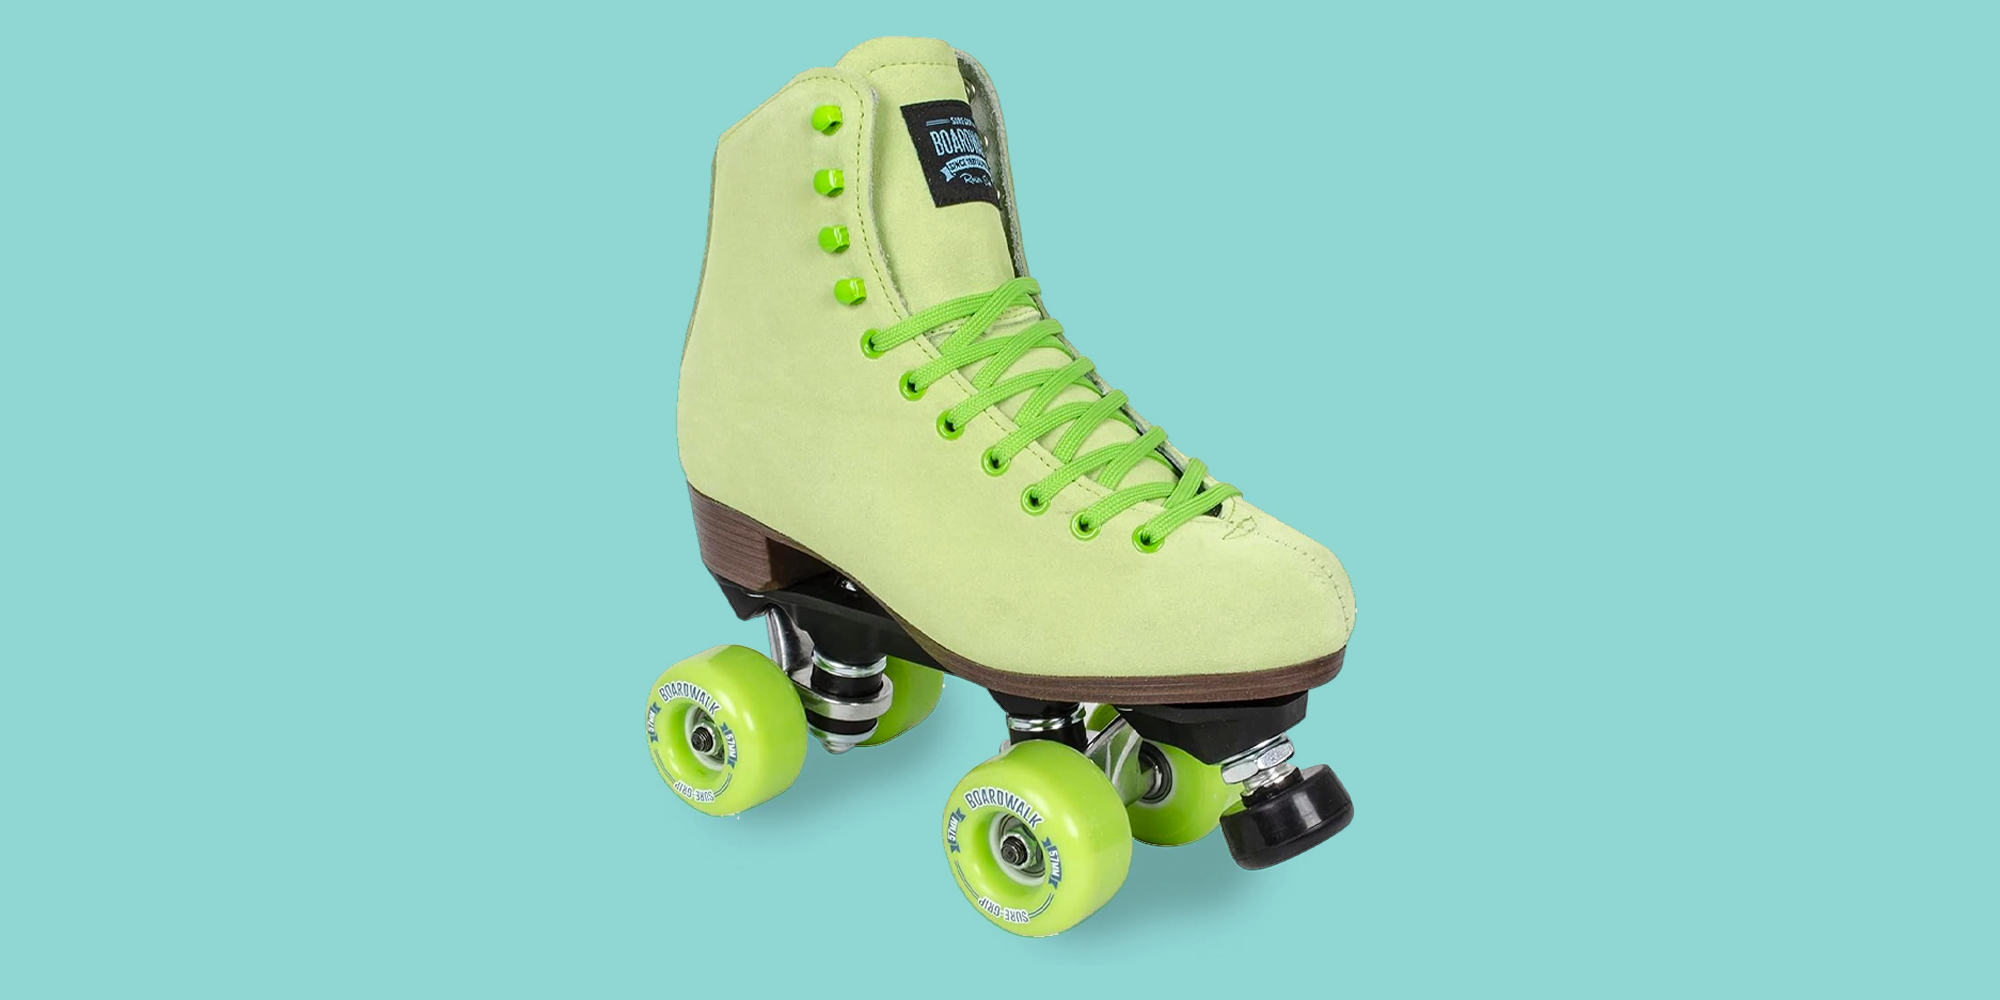 Holiday Deal - Moxi Beach Bunny Roller Skates + Accessories 30% OFF